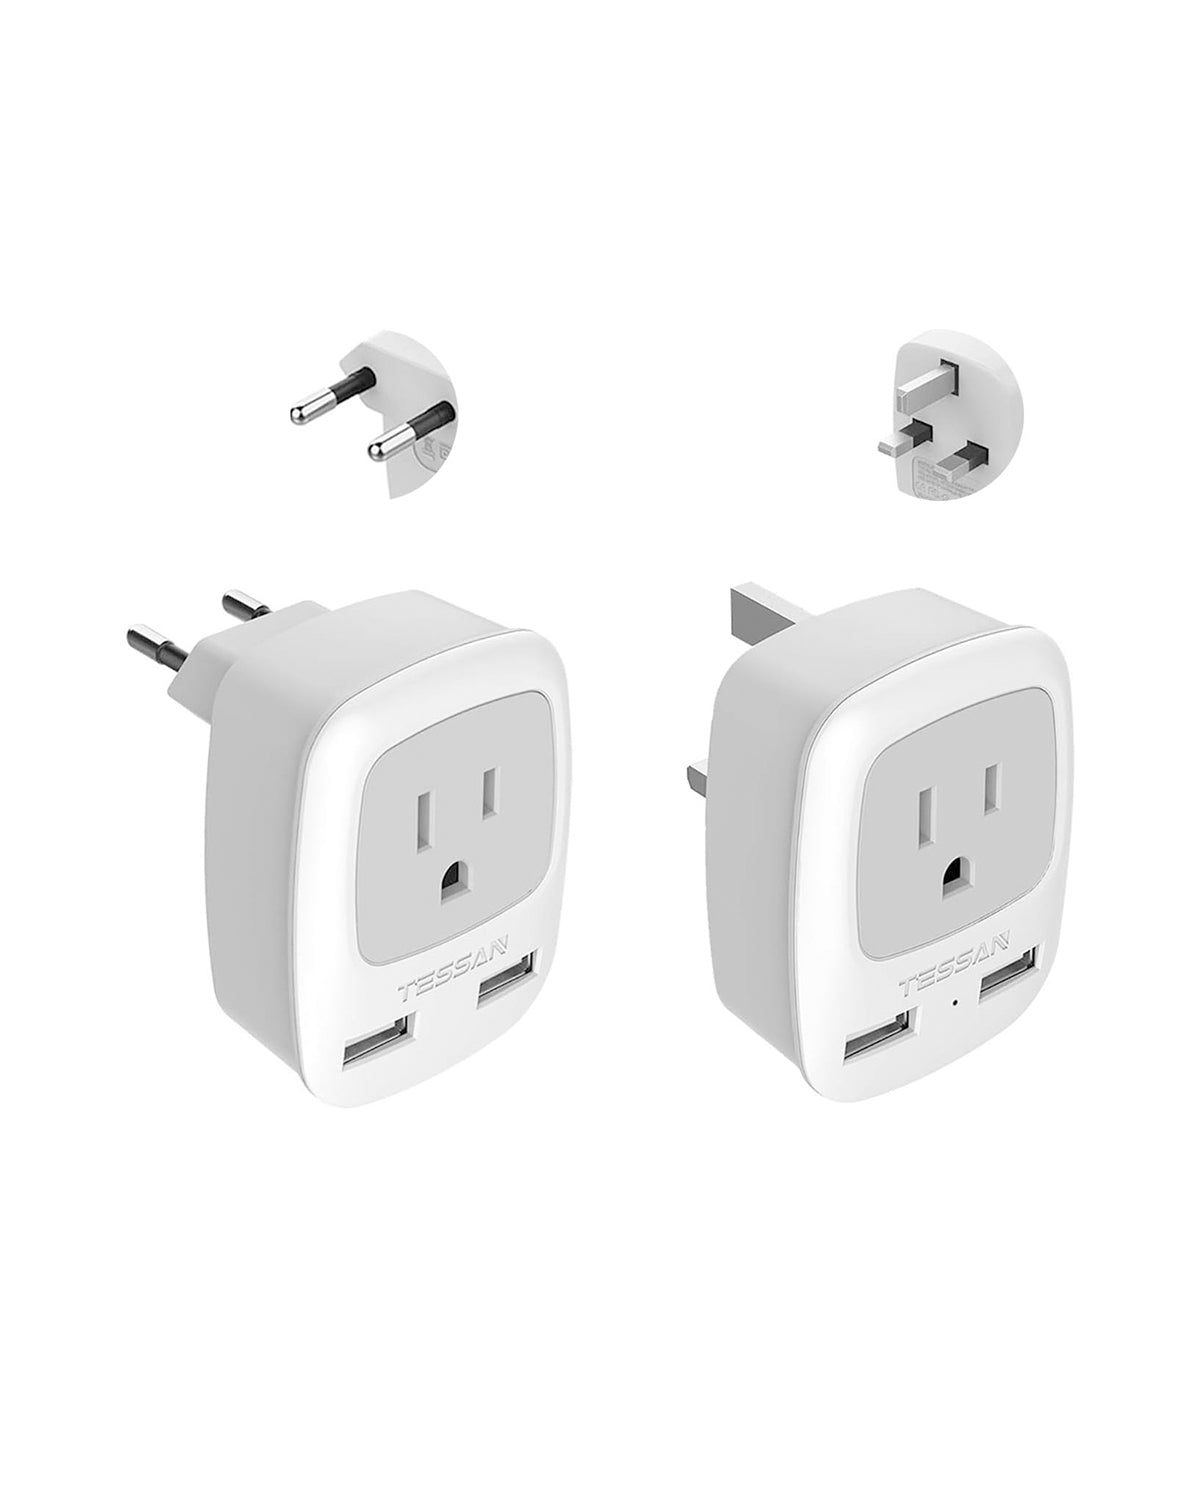 TESSAN All European Travel Plug Adapter Kit, International Power Outlet Adaptor with 2 USB